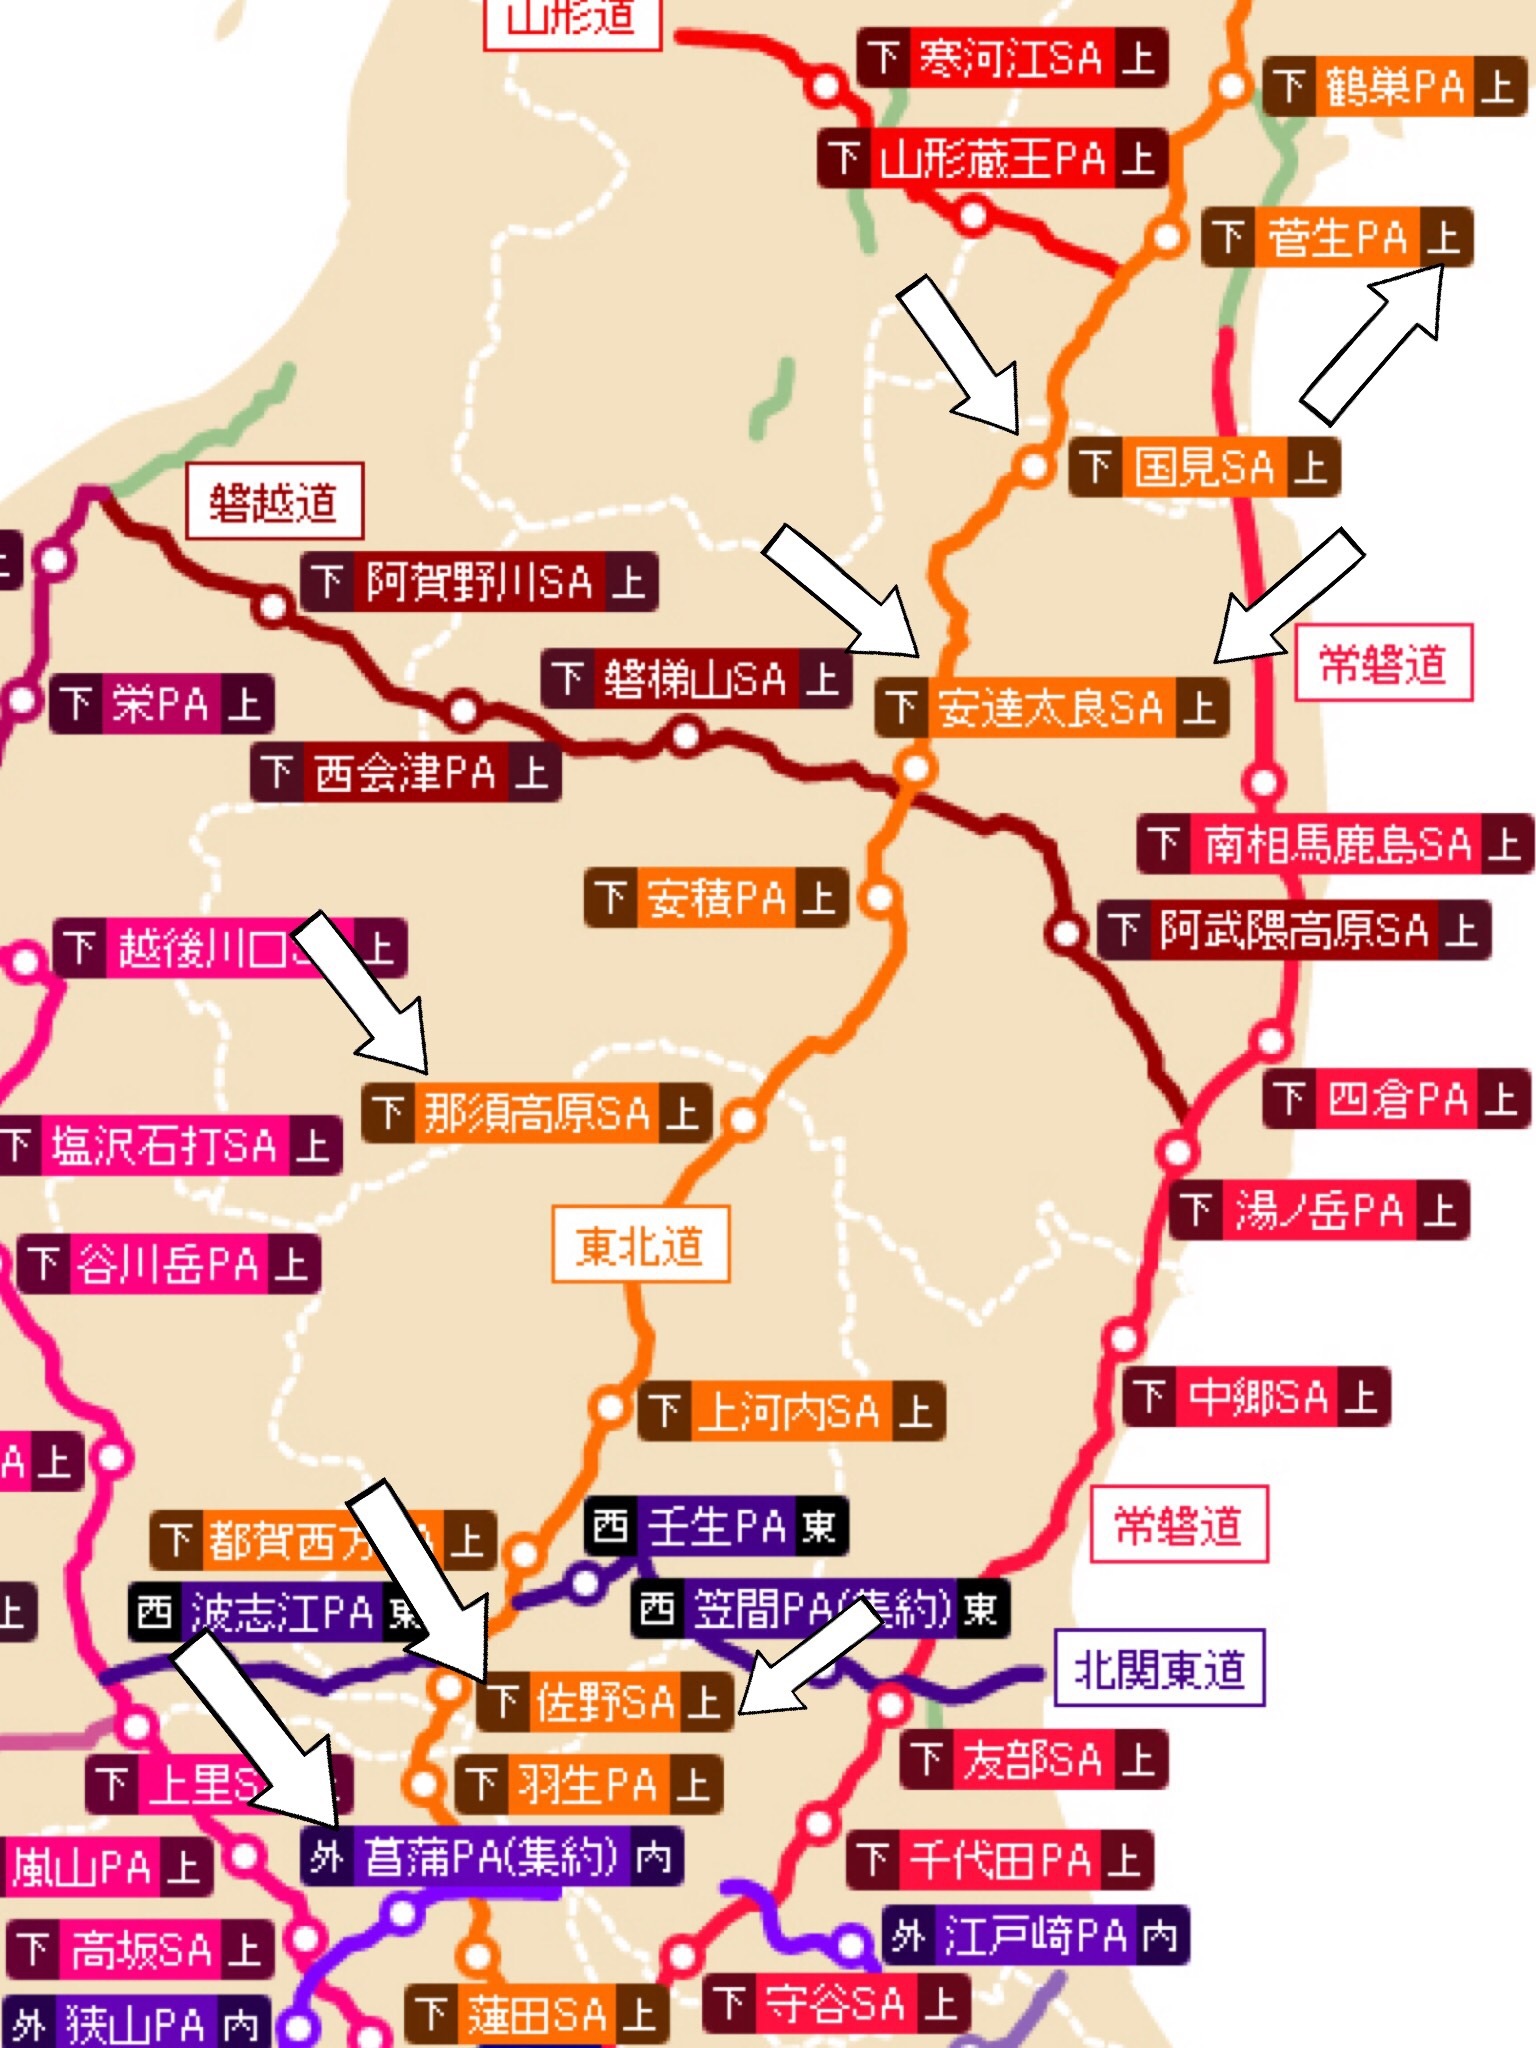 ＥＶ充電スポット 東北自動車道 2017 東北旅行